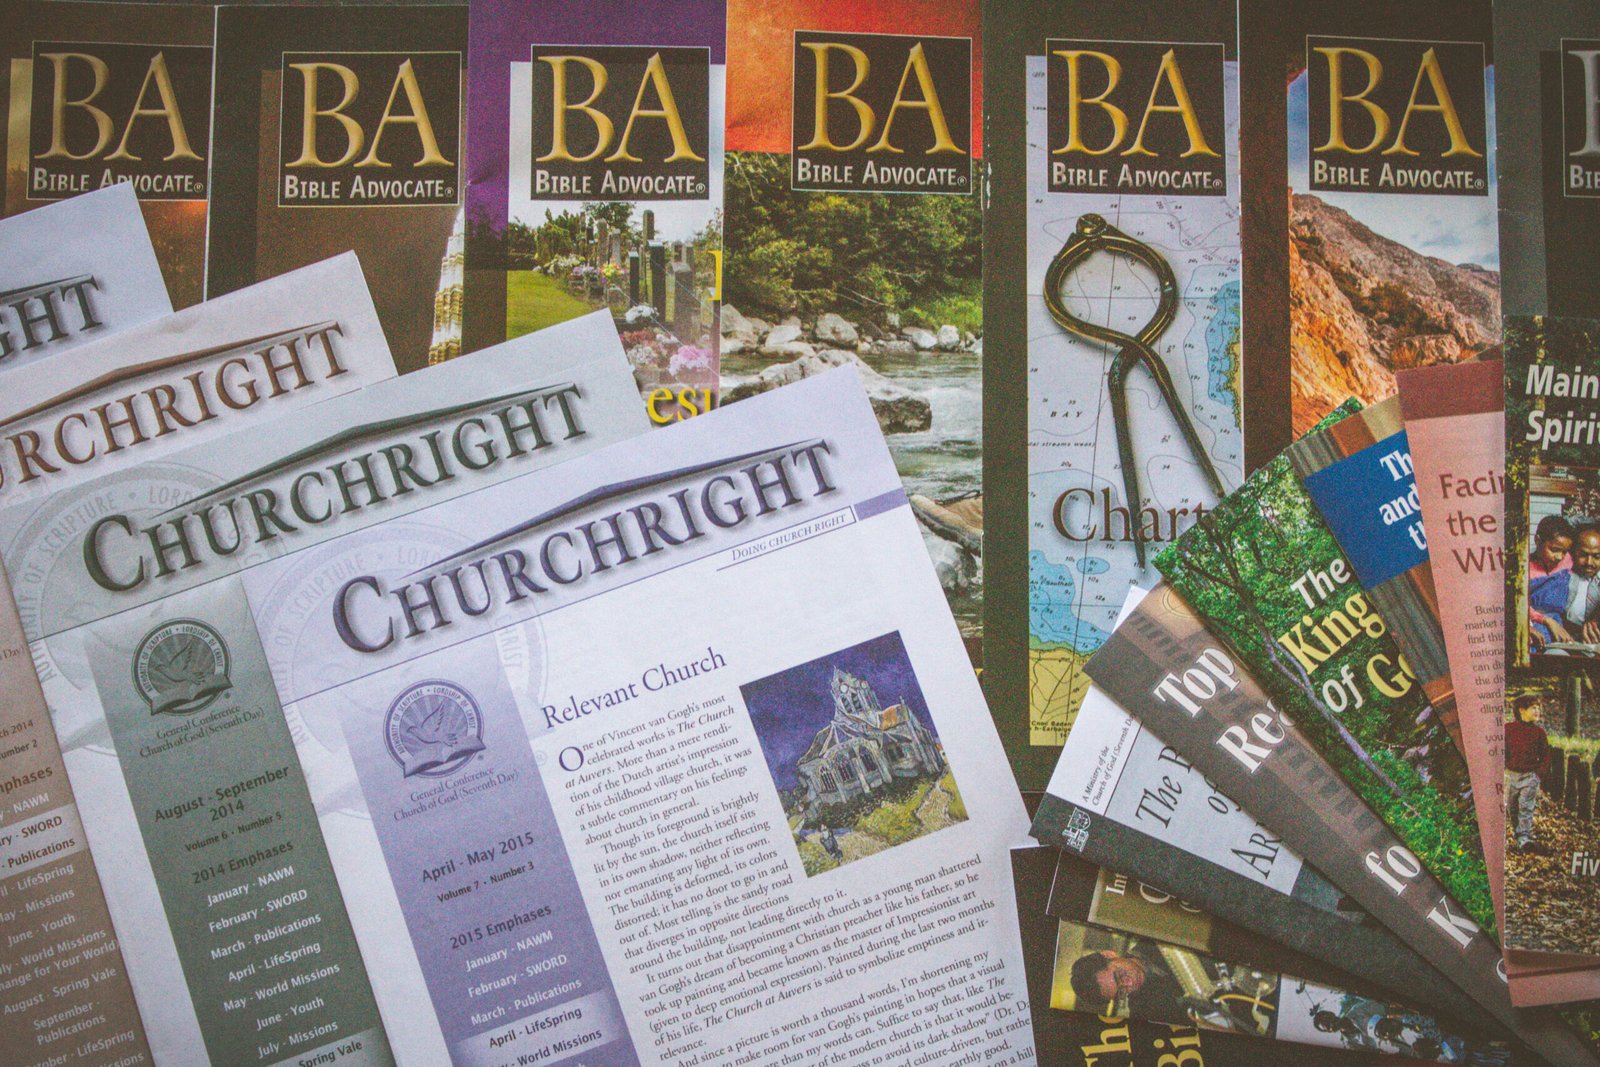 Printed materials laid out together including Churchright, BA, and various tracts